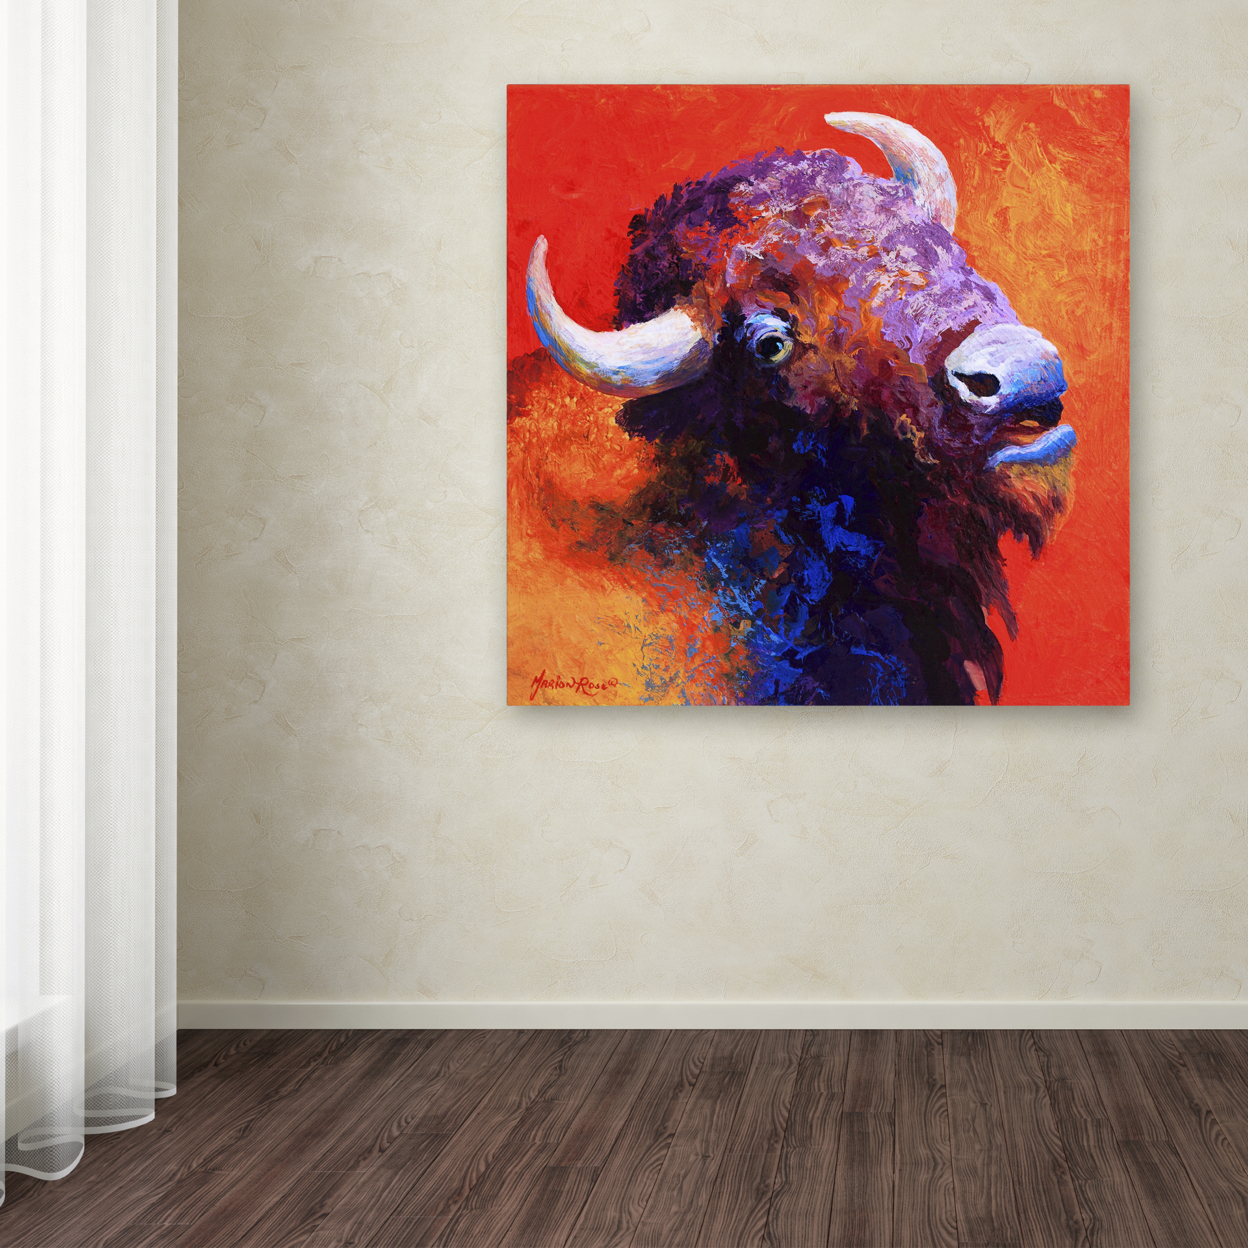 Marion Rose 'Bison Attitude' Ready To Hang Canvas Art 35 X 35 Inches Made In USA